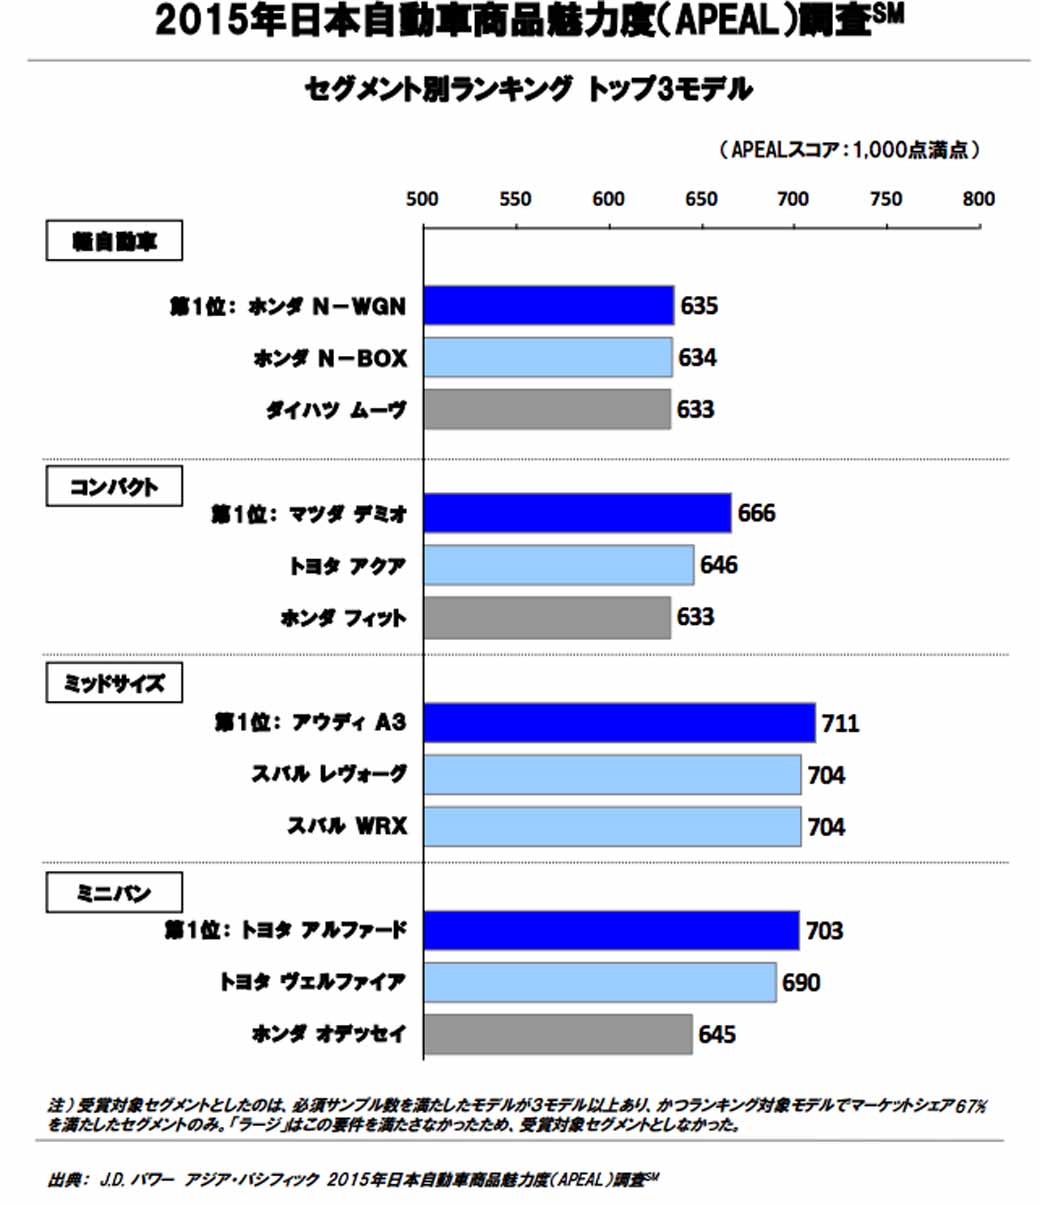 jd-power-the-japan-automobile-commodity-attractiveness-年-2015-apeal-survey-results-announced20150928-1